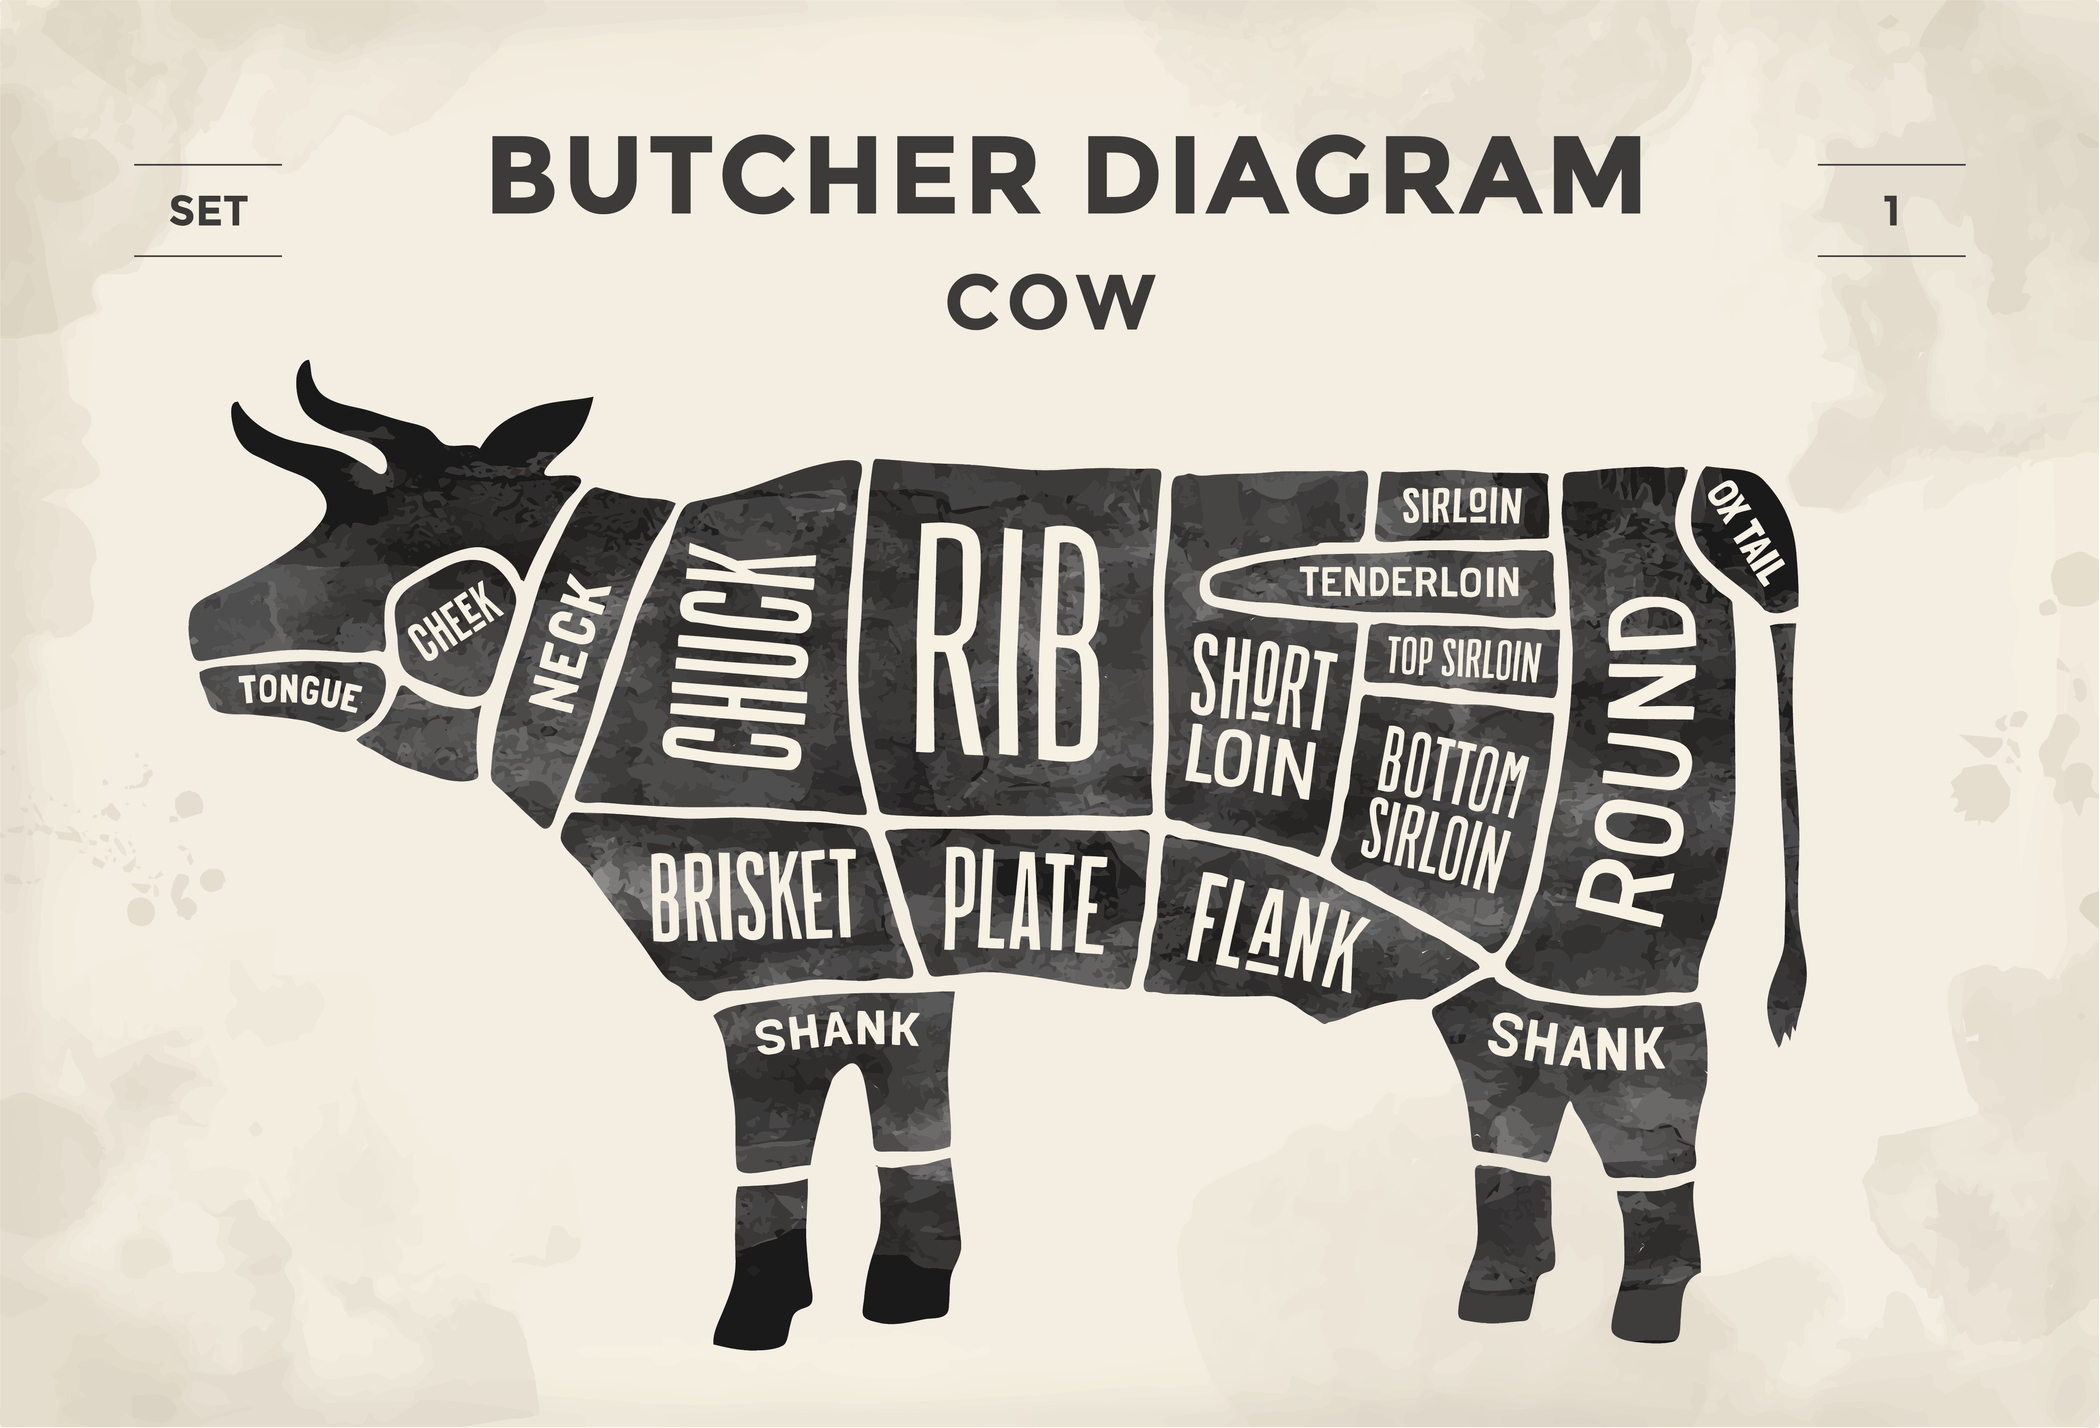 These are the Best Cuts of Beef Explained (Hint: Not the Most